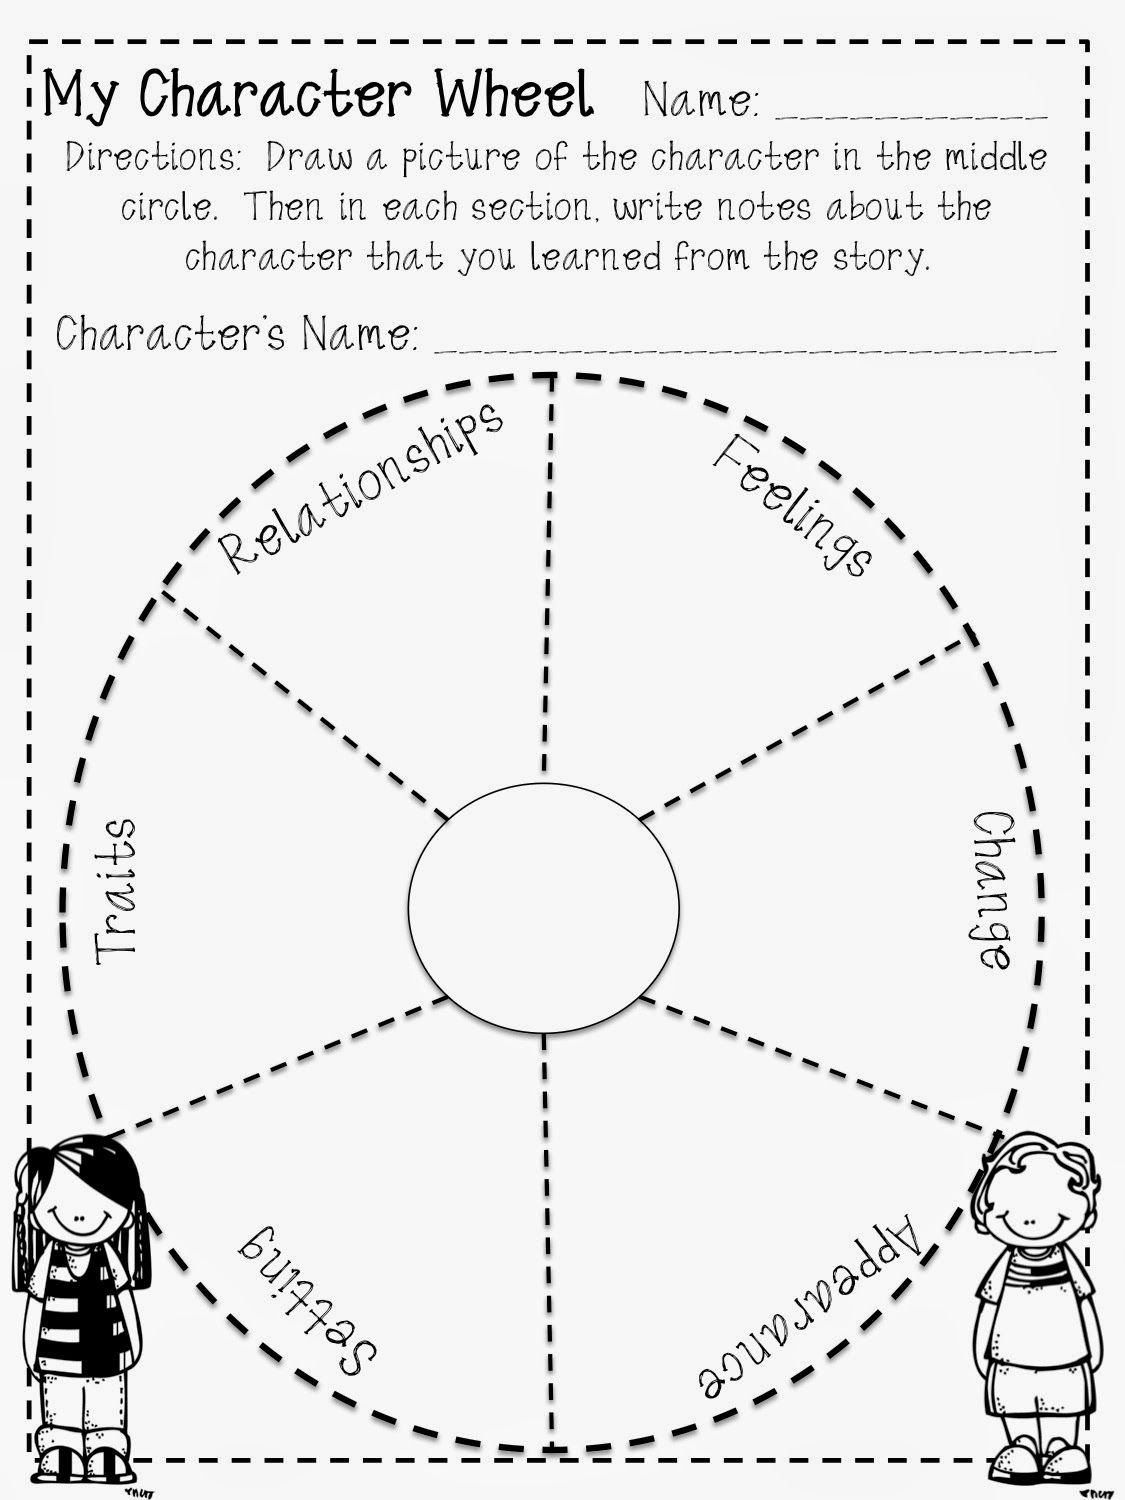 Fun Character Wheel Printable For Any Book! Free! | Teaching 4/5 - Free Printable Character Map